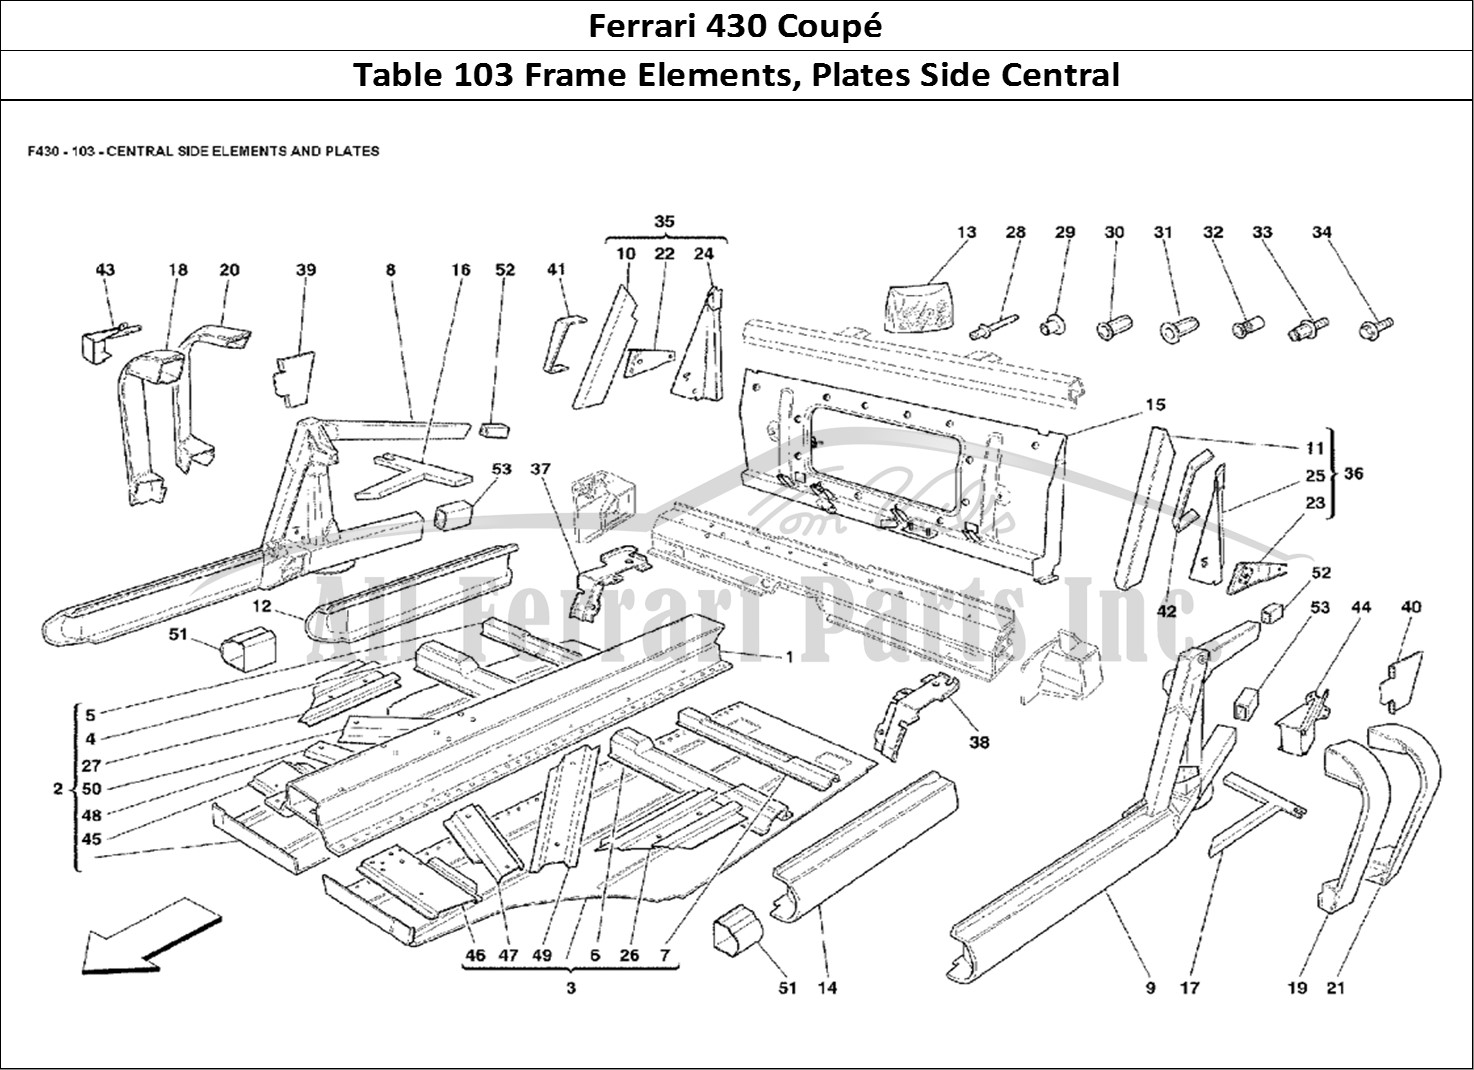 Ferrari Parts Ferrari 430 Coup Page 103 Central Side Elements and